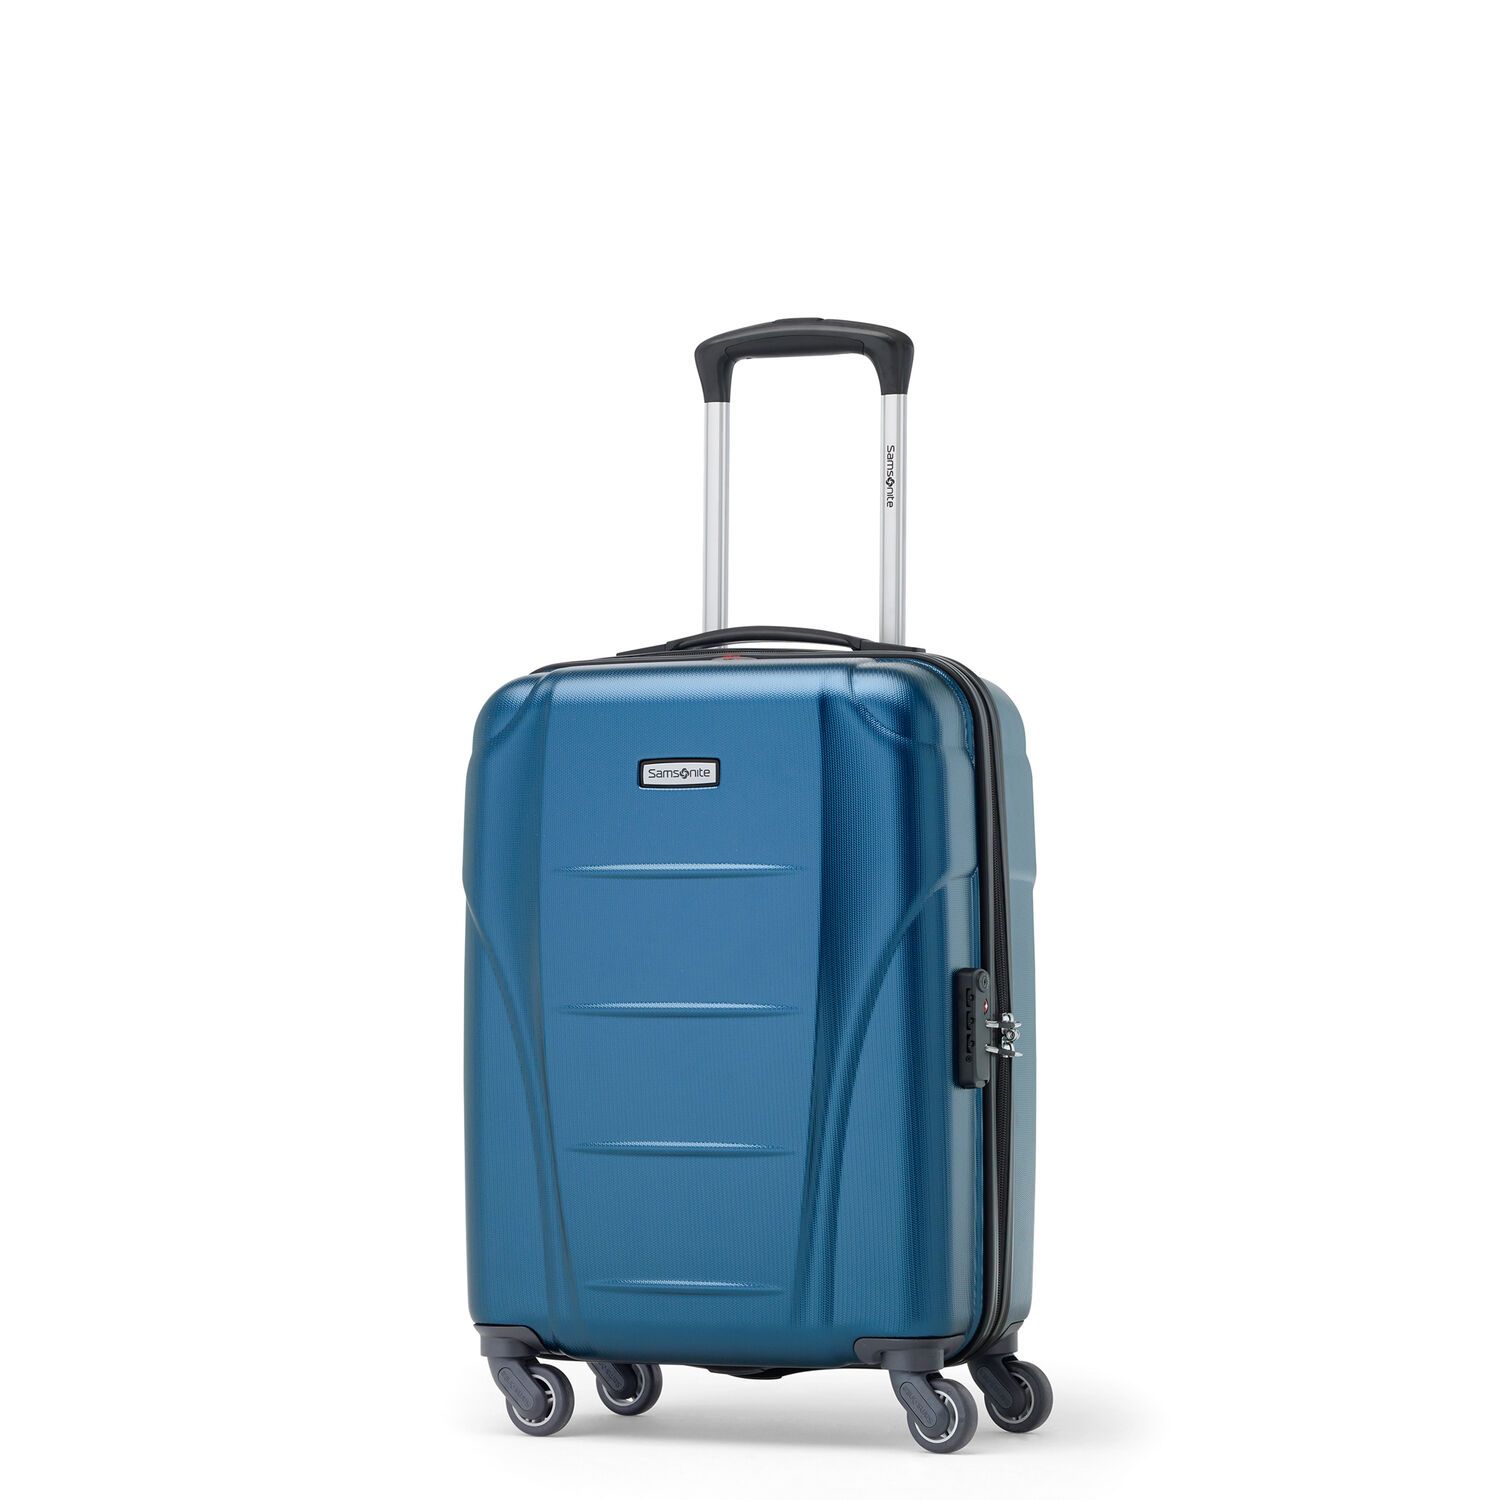 Samsonite Winfield NXT Spinner Carry-On Luggage - Blue